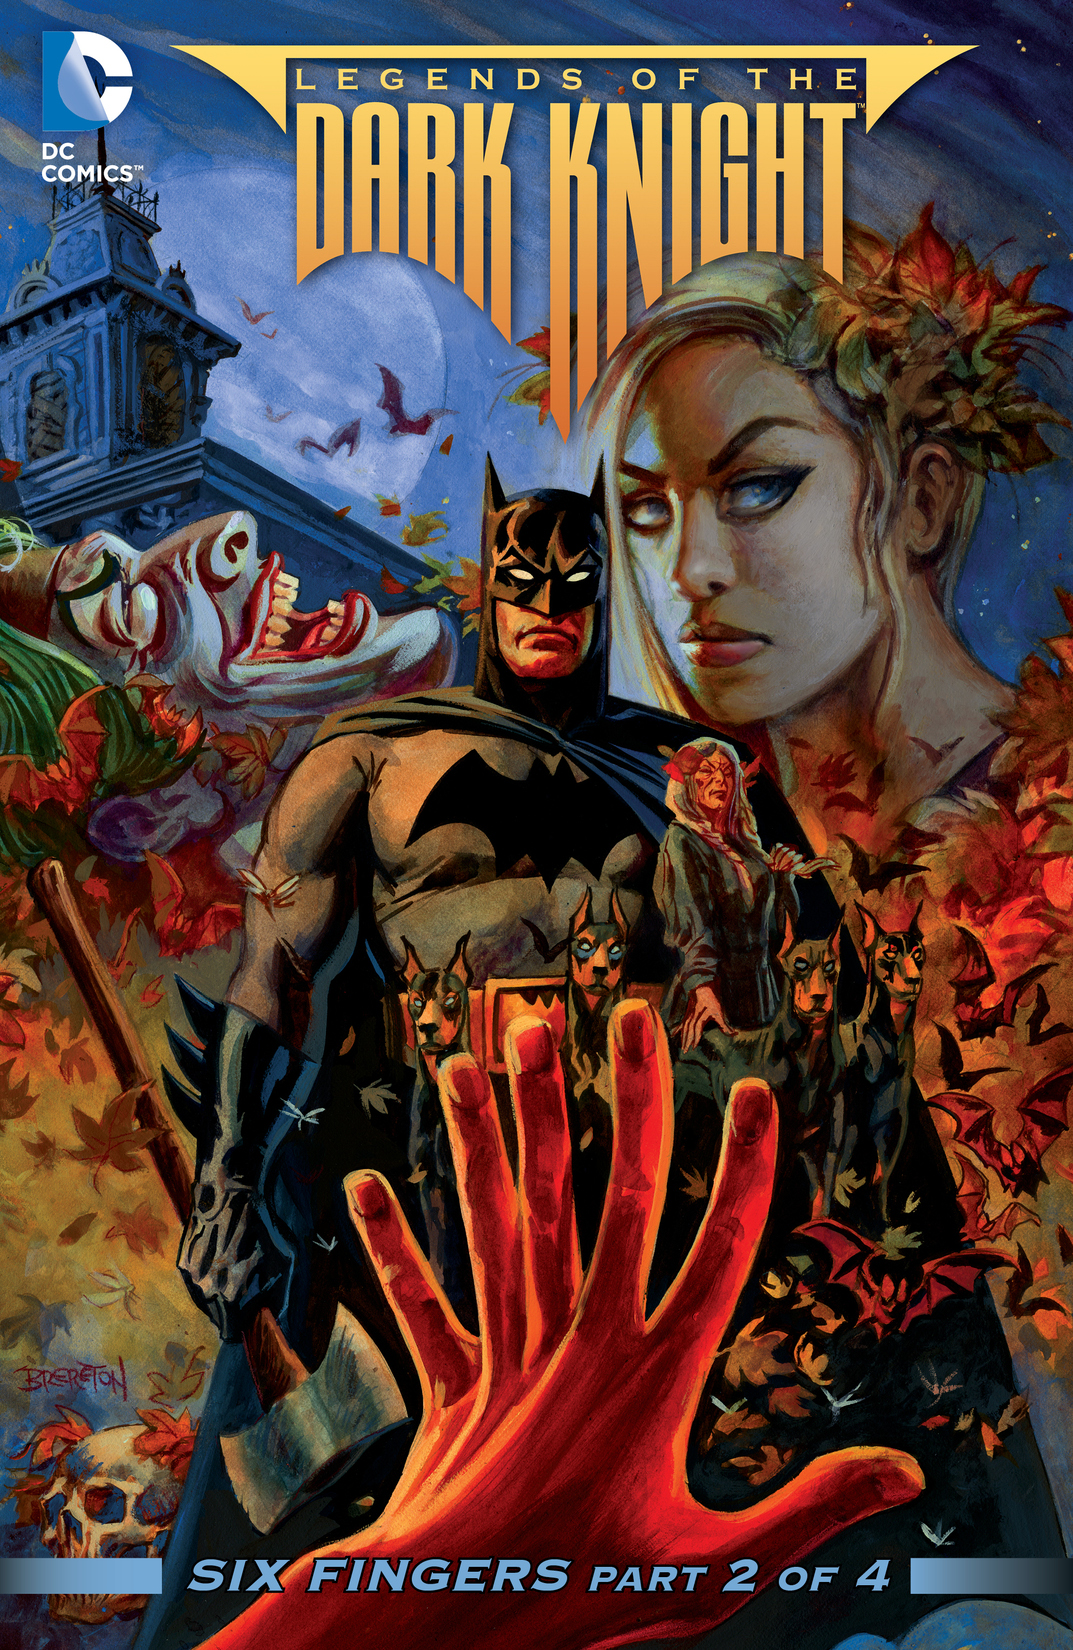 Legends of the Dark Knight #86 preview images